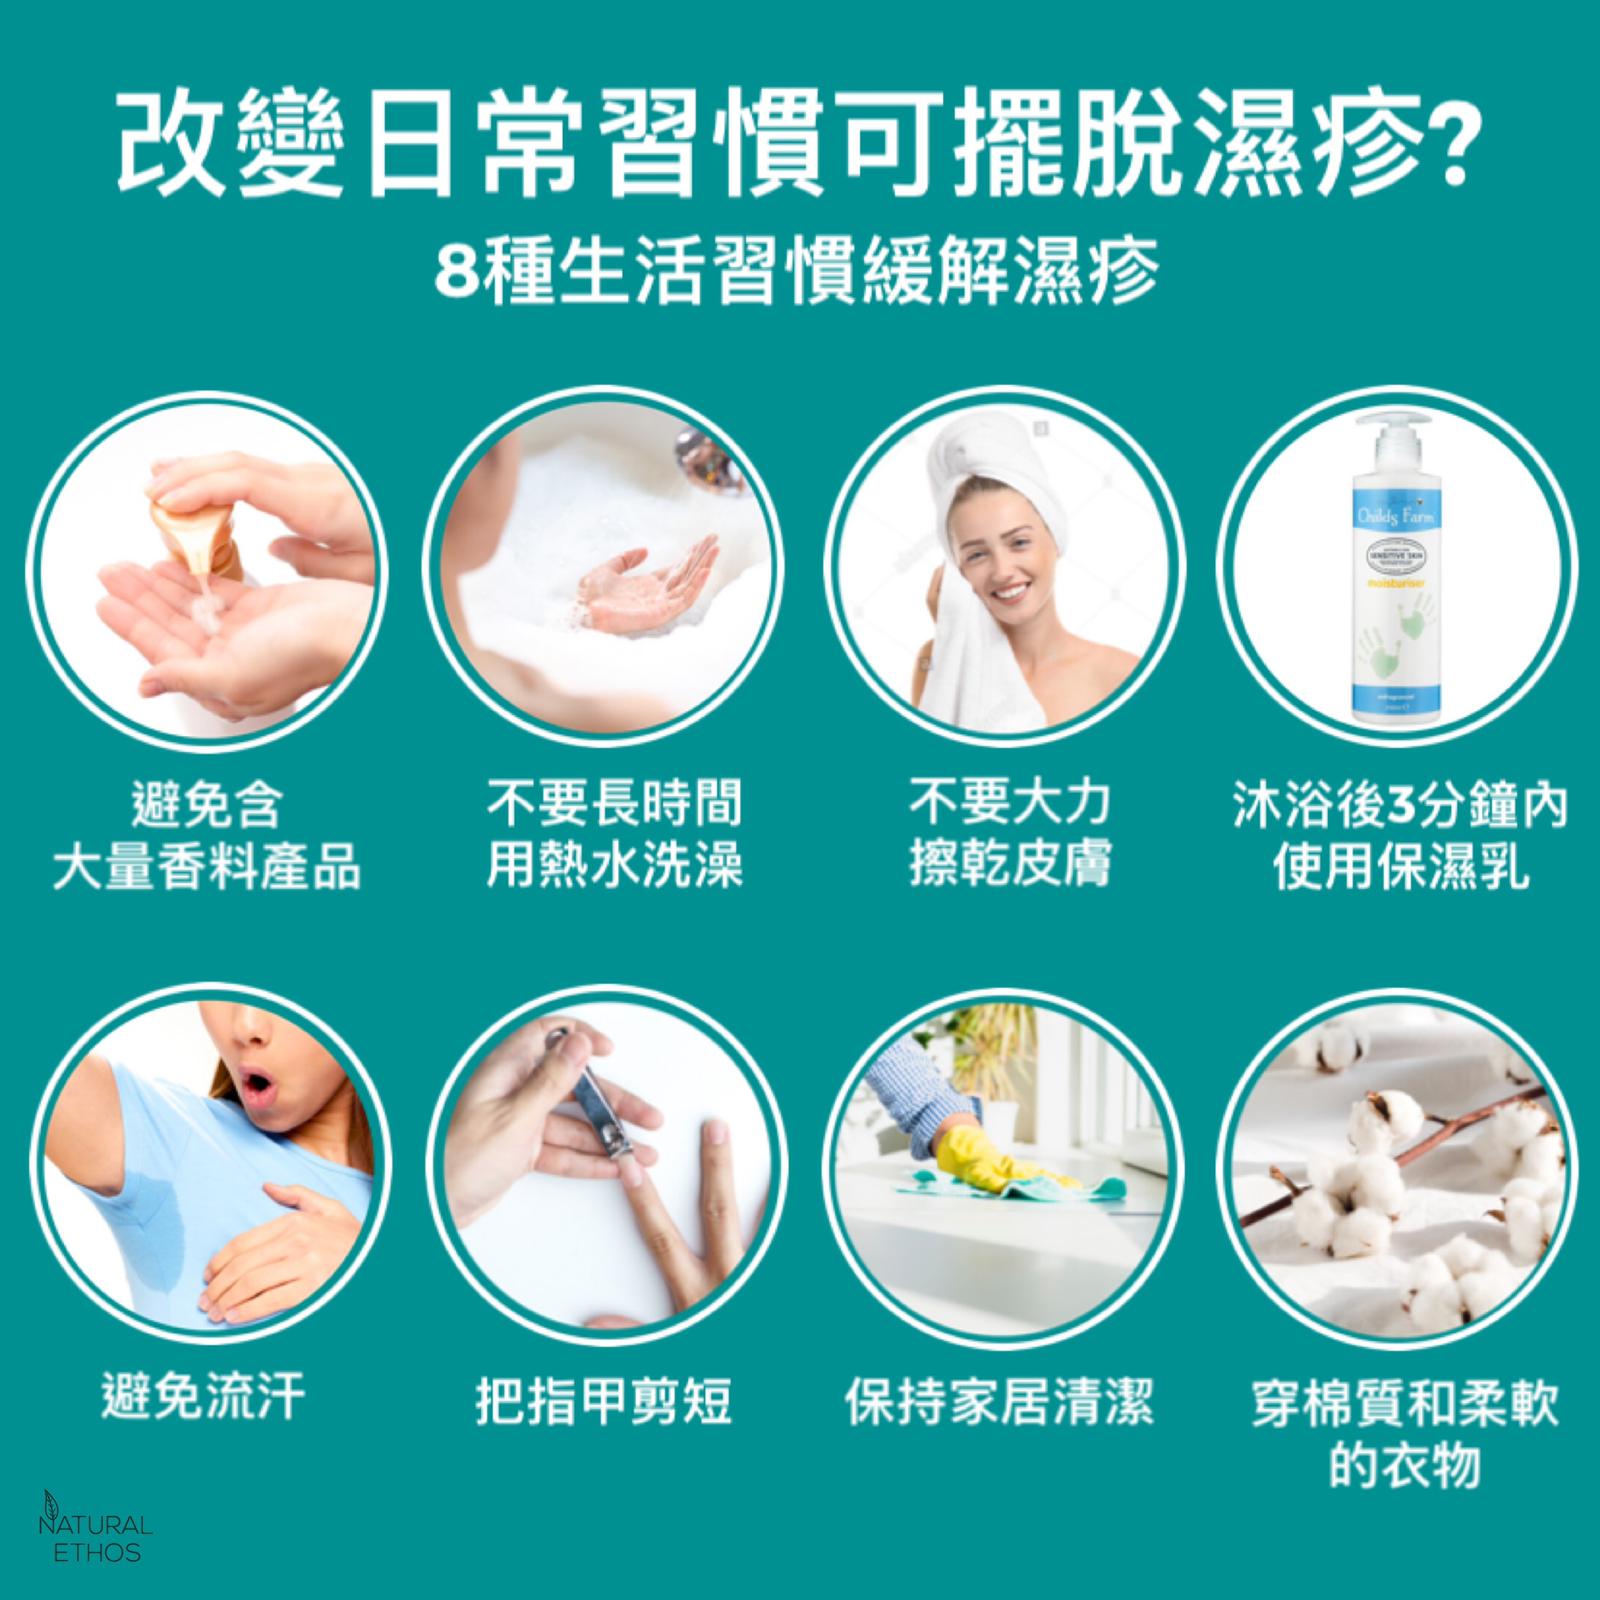 daily actions to help sensitive skin hk